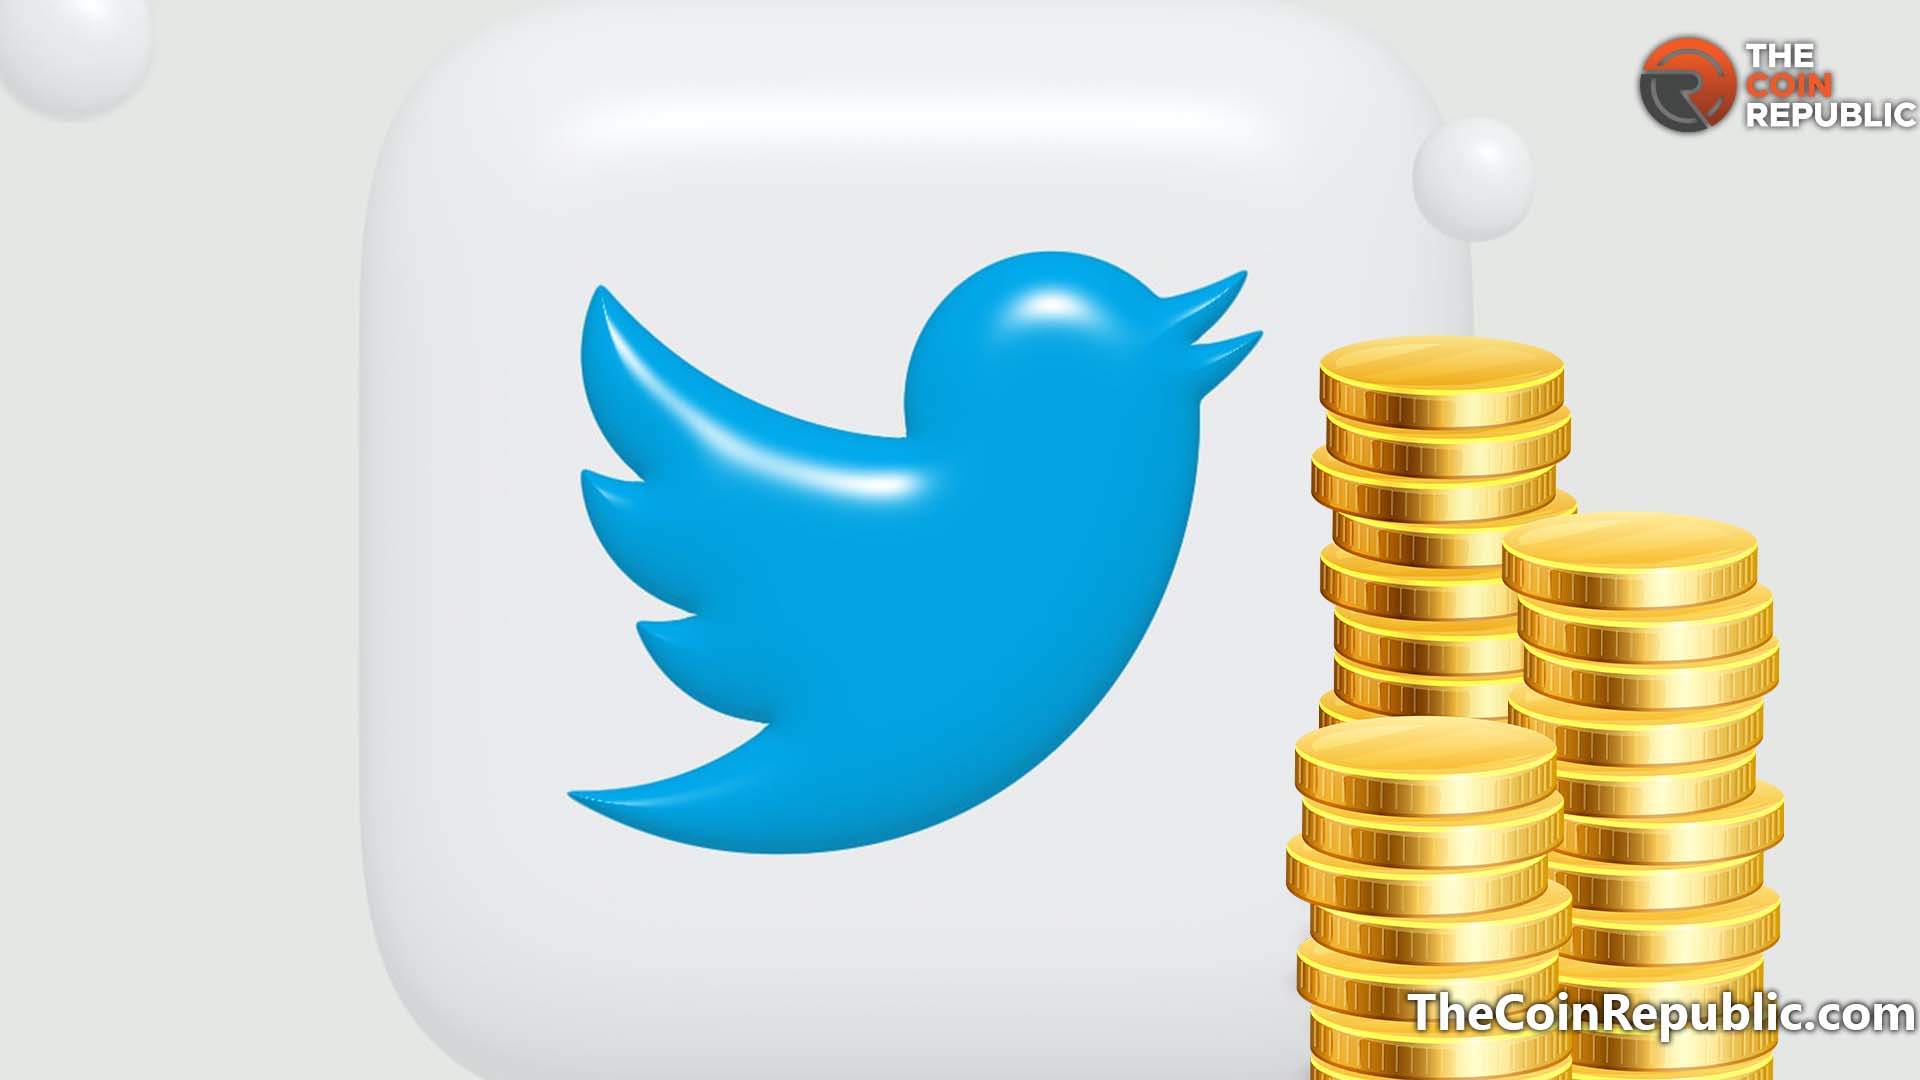 Twitter 2.0 Update: MobileCoin Jumped Over 300%, Dogecoin Momentarily Up